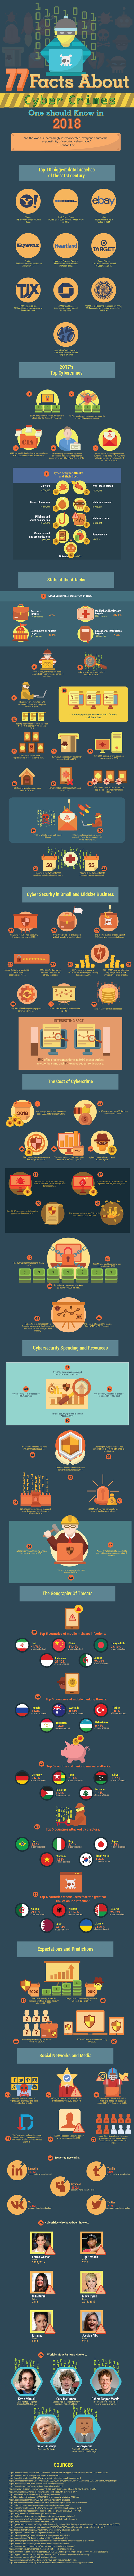 cyber crimes 2018 infographic